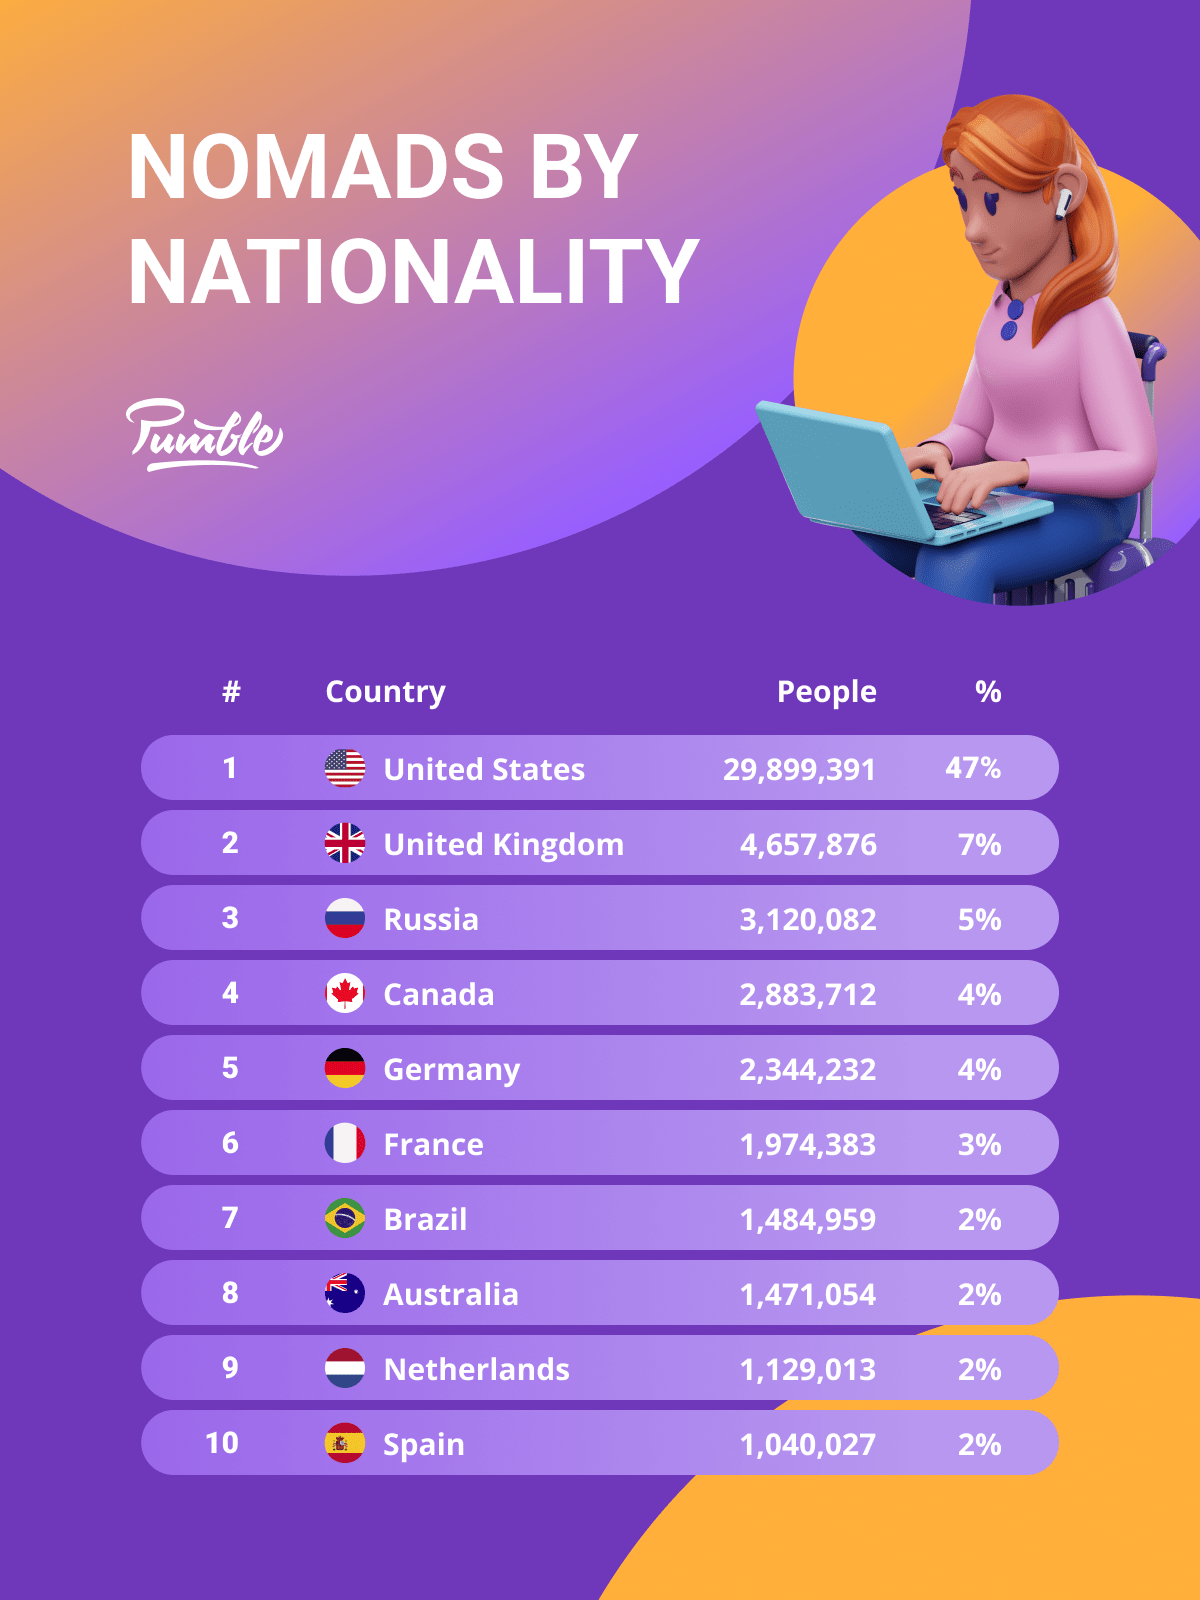 Nomads by nationality